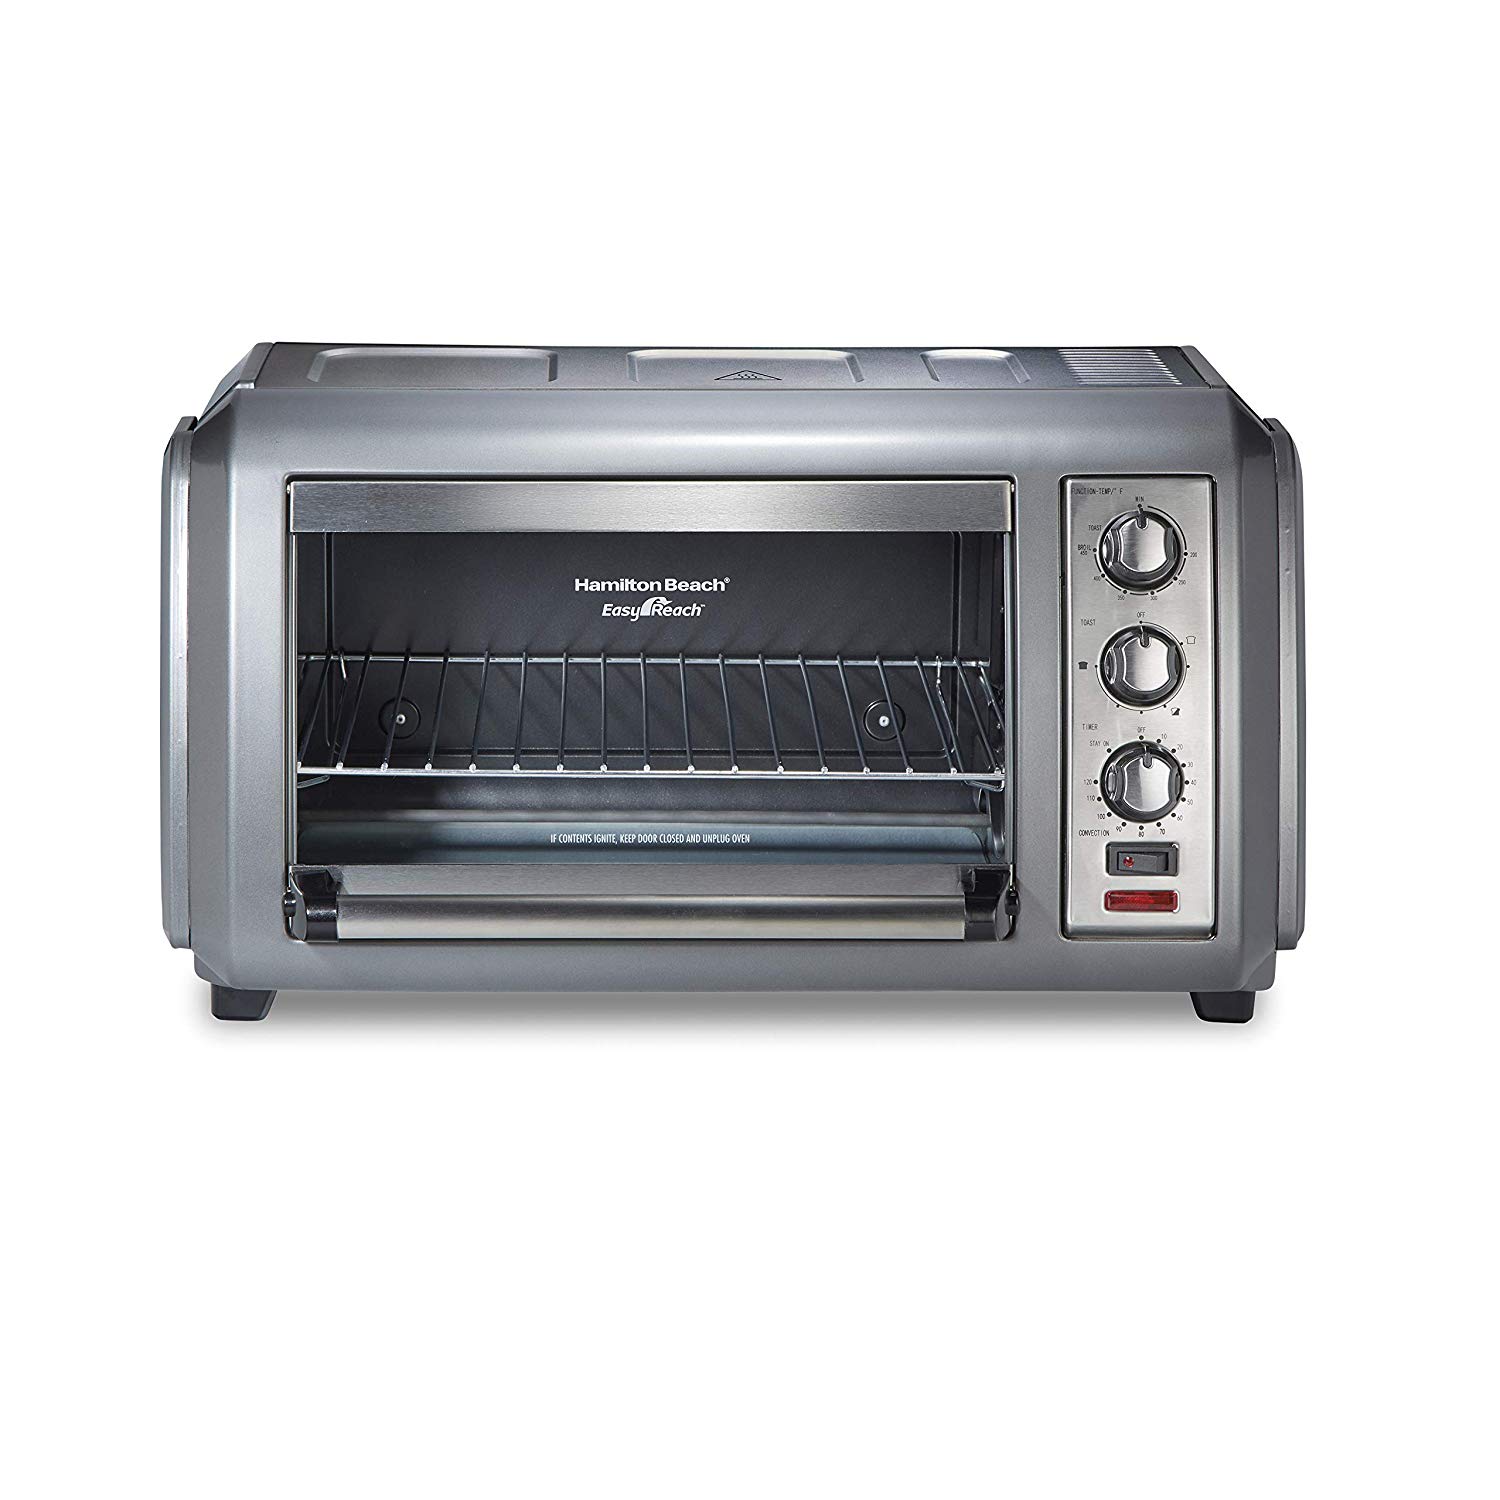 An image related to Hamilton Beach 31434 Stainless Steel Convection Countertop Four Slice Toaster Oven